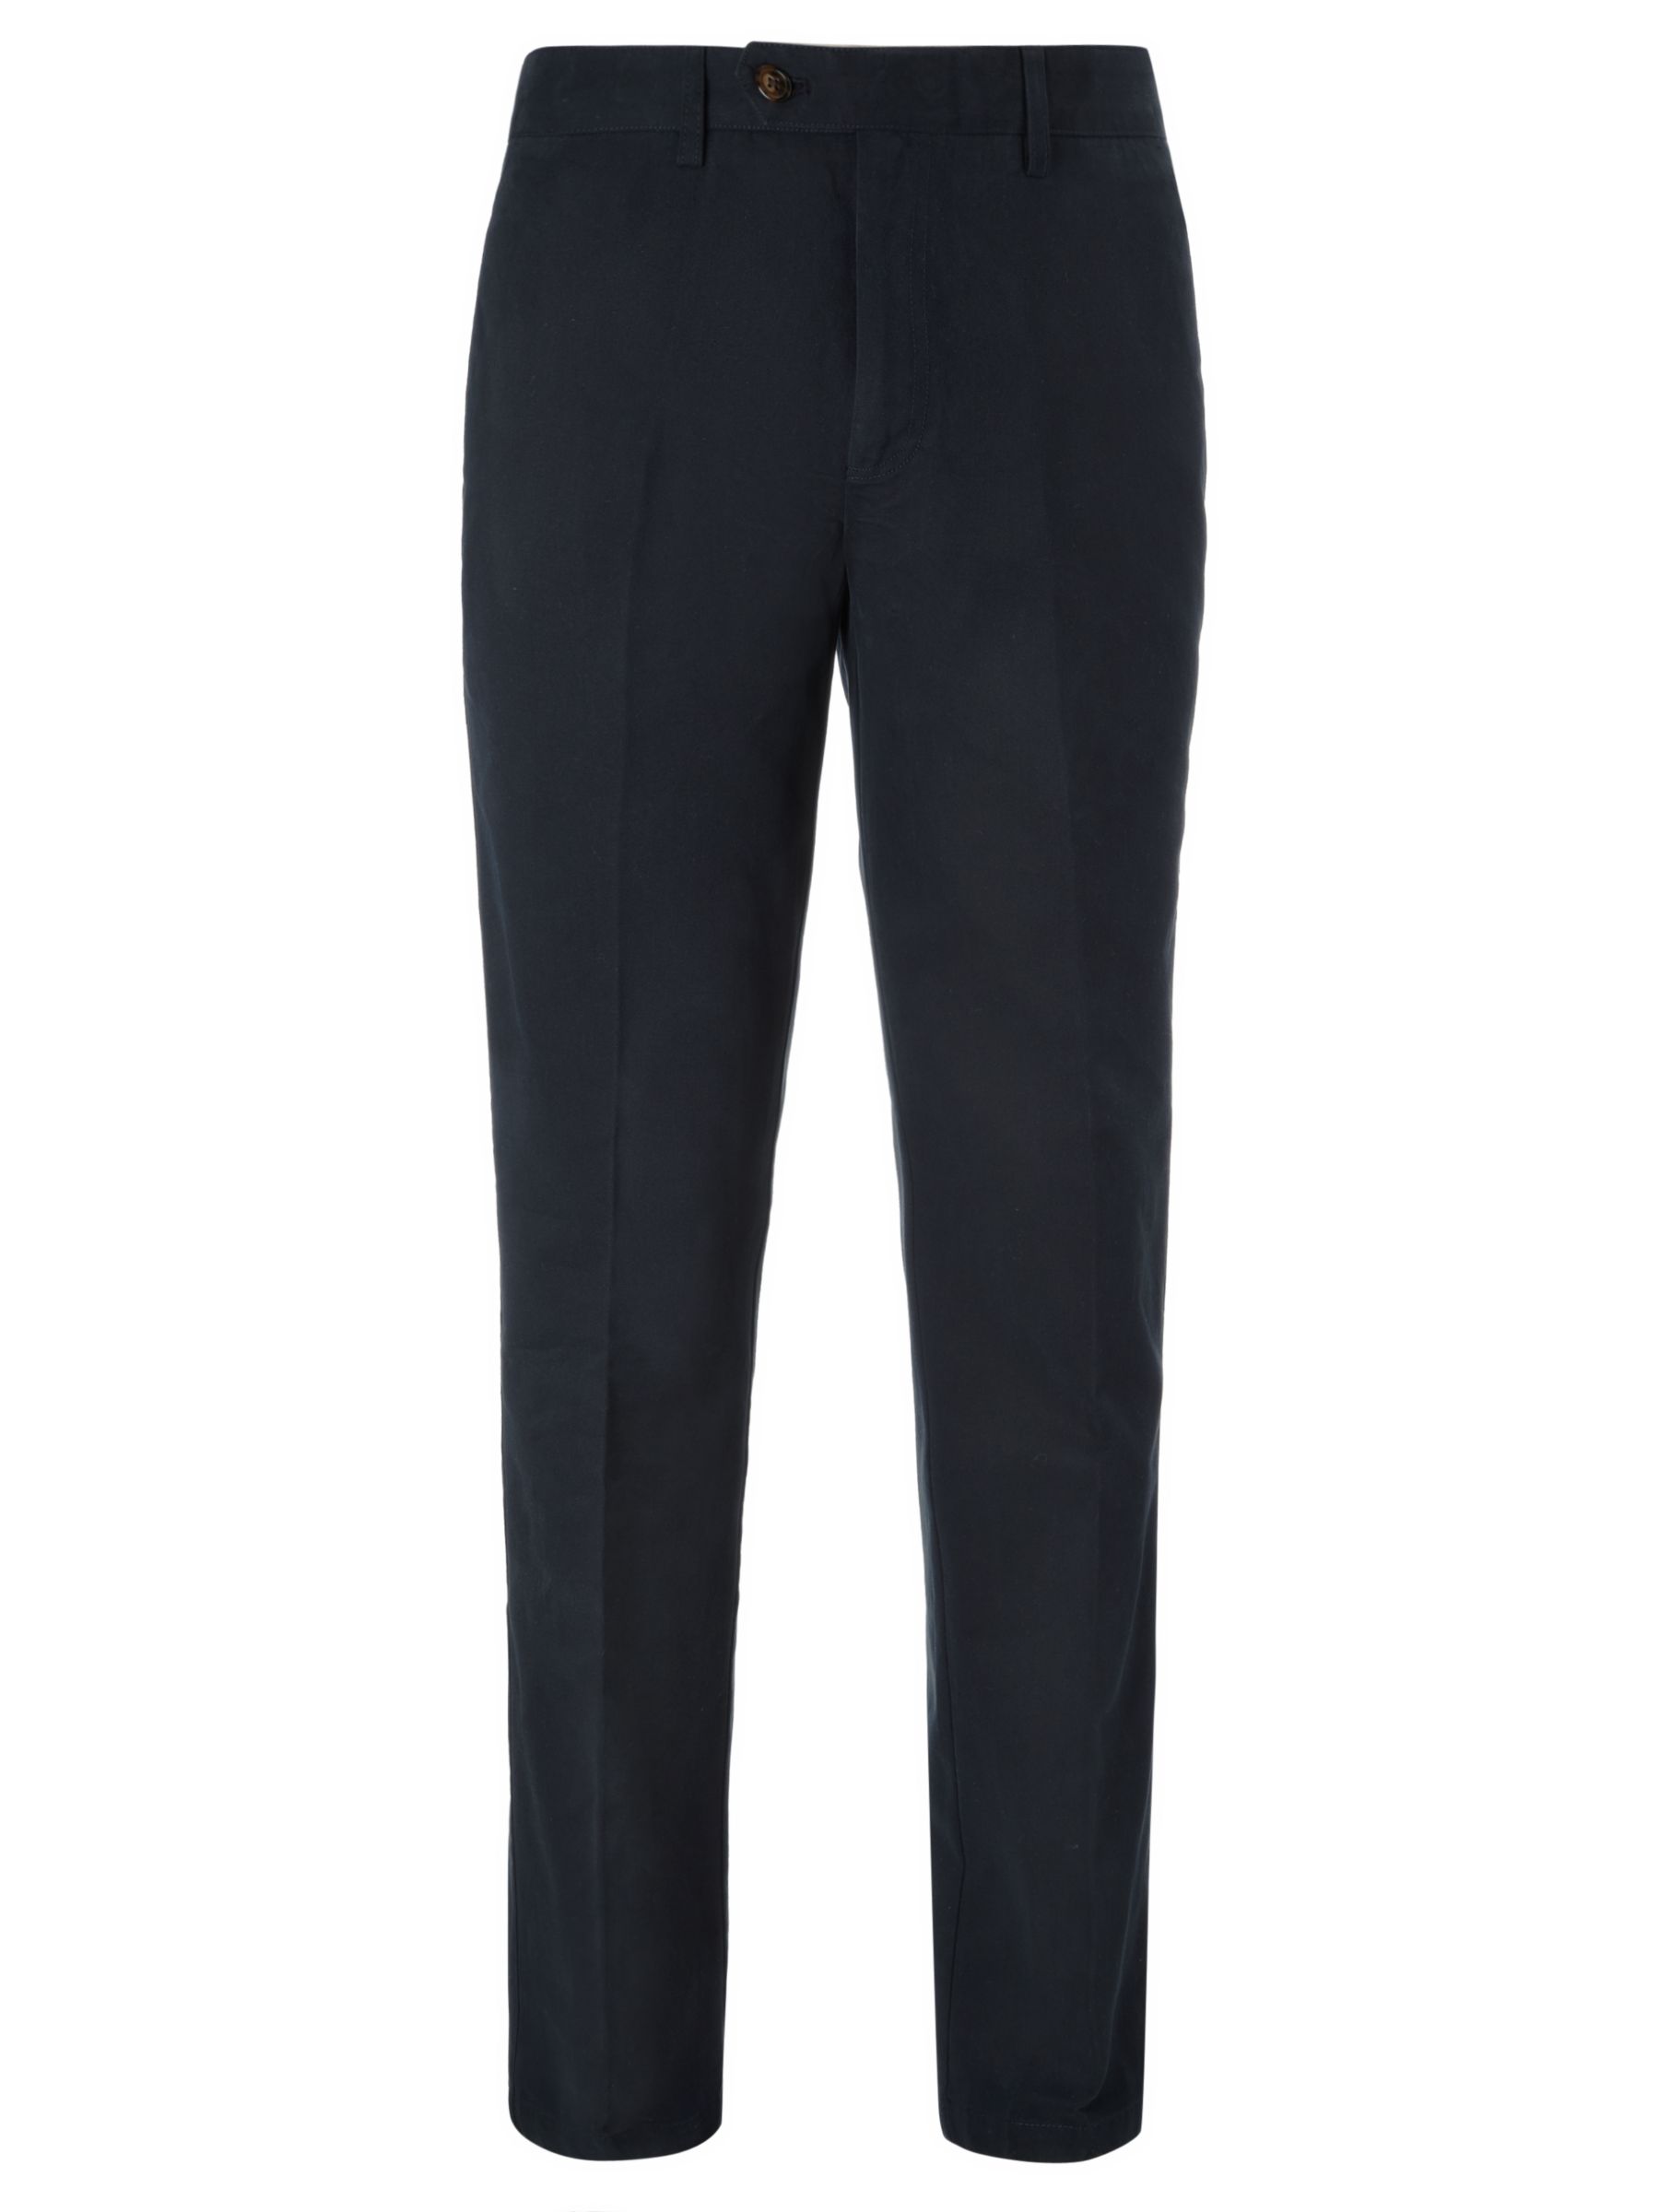 John Lewis & Partners Wrinkle Free Flat Front Trousers, Navy, 38L